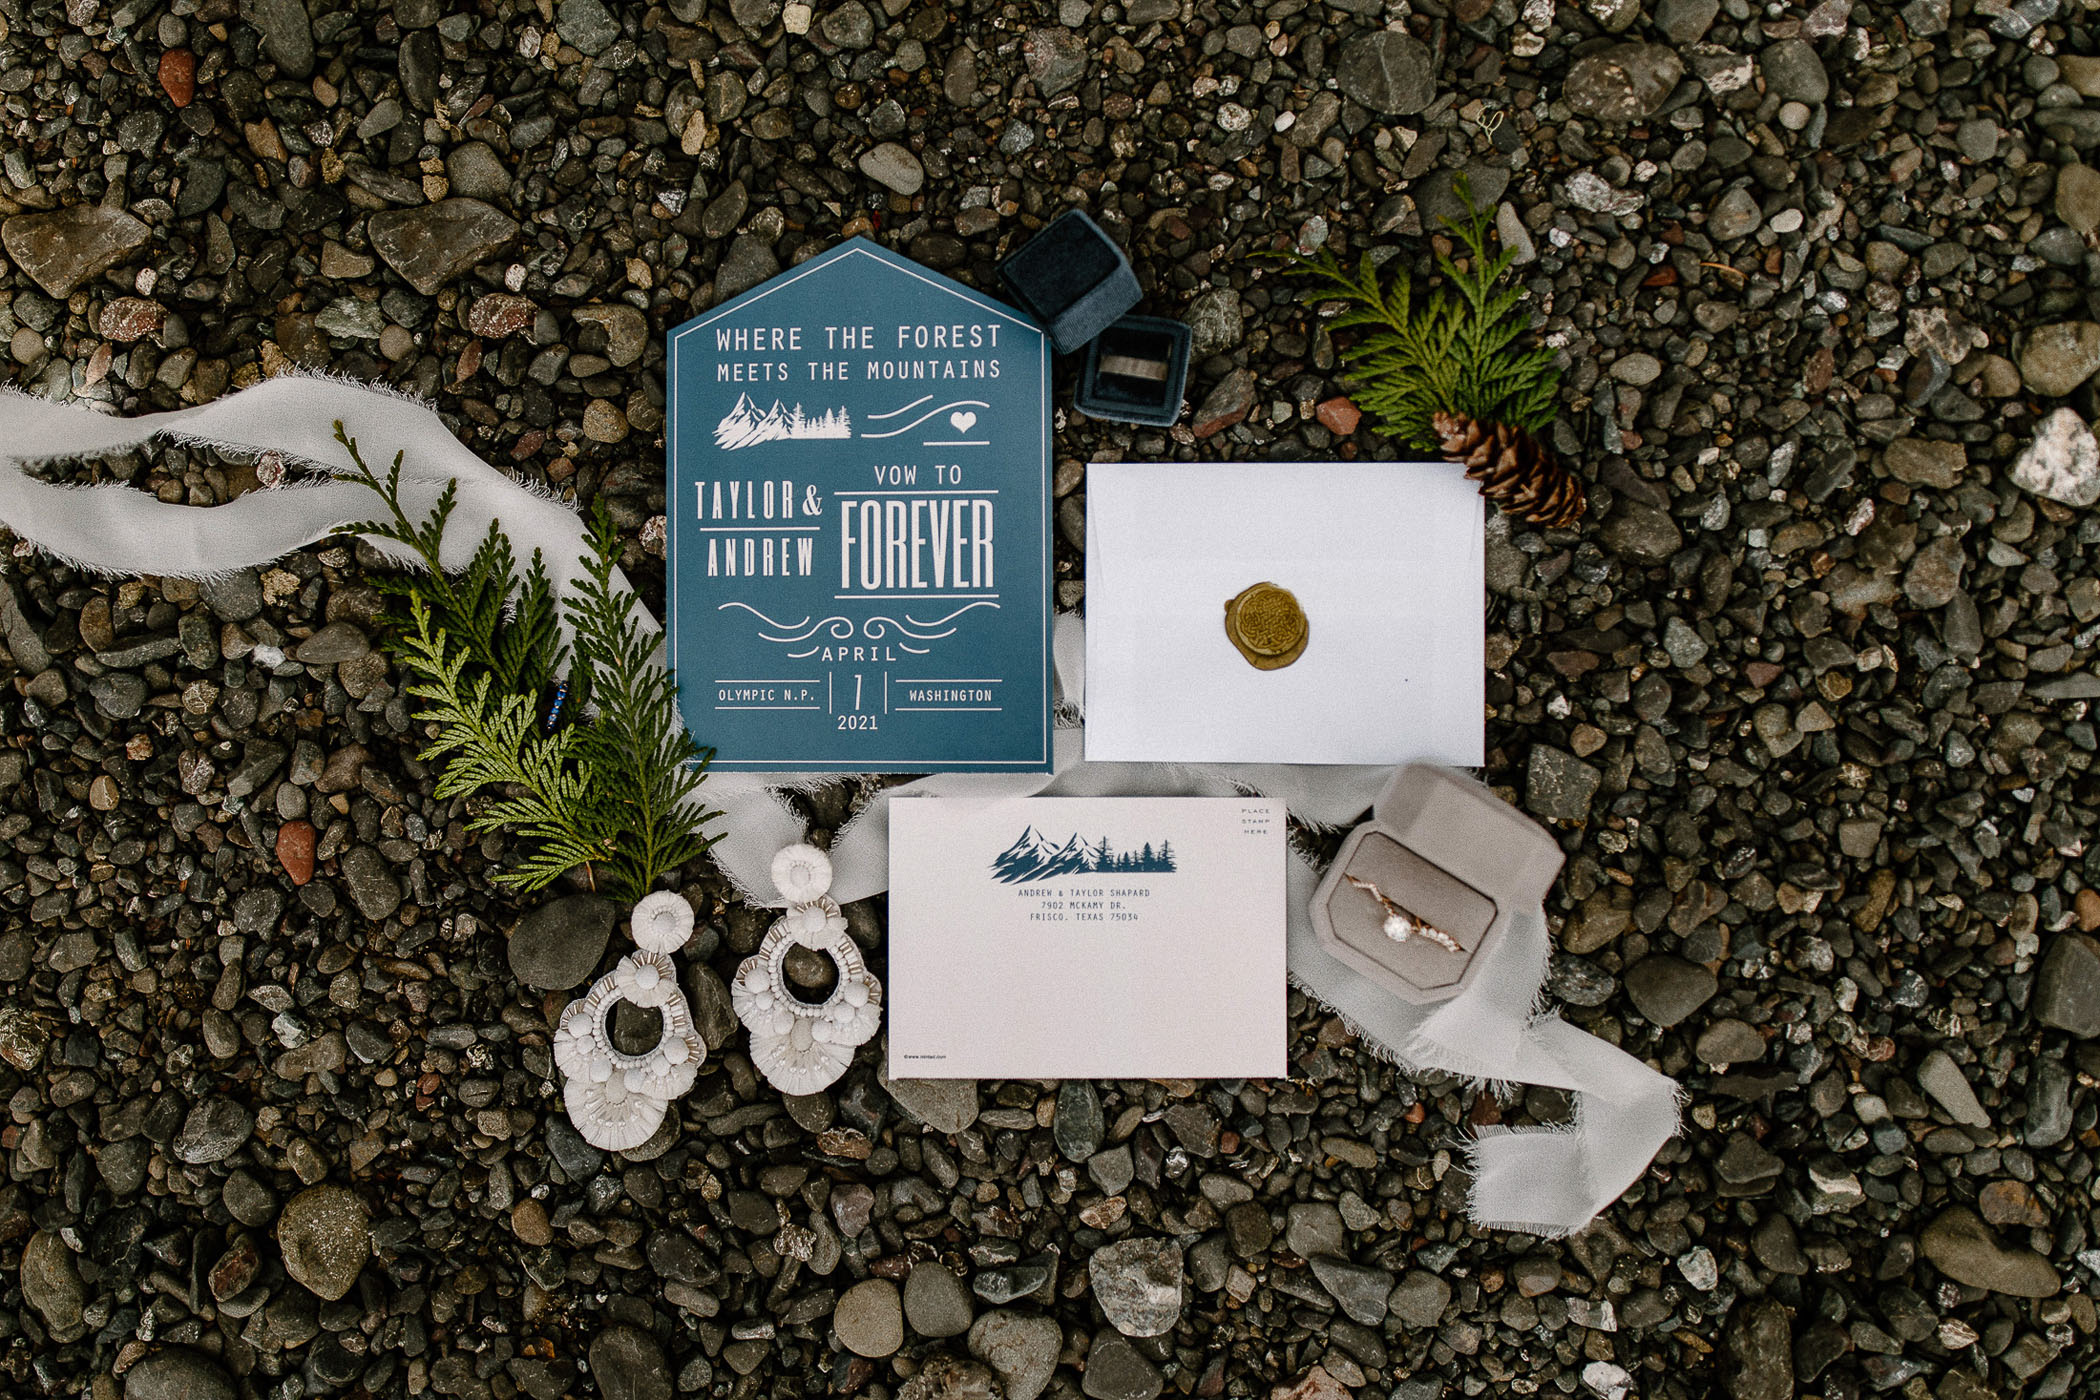 Blue and white wedding invitations on gravel